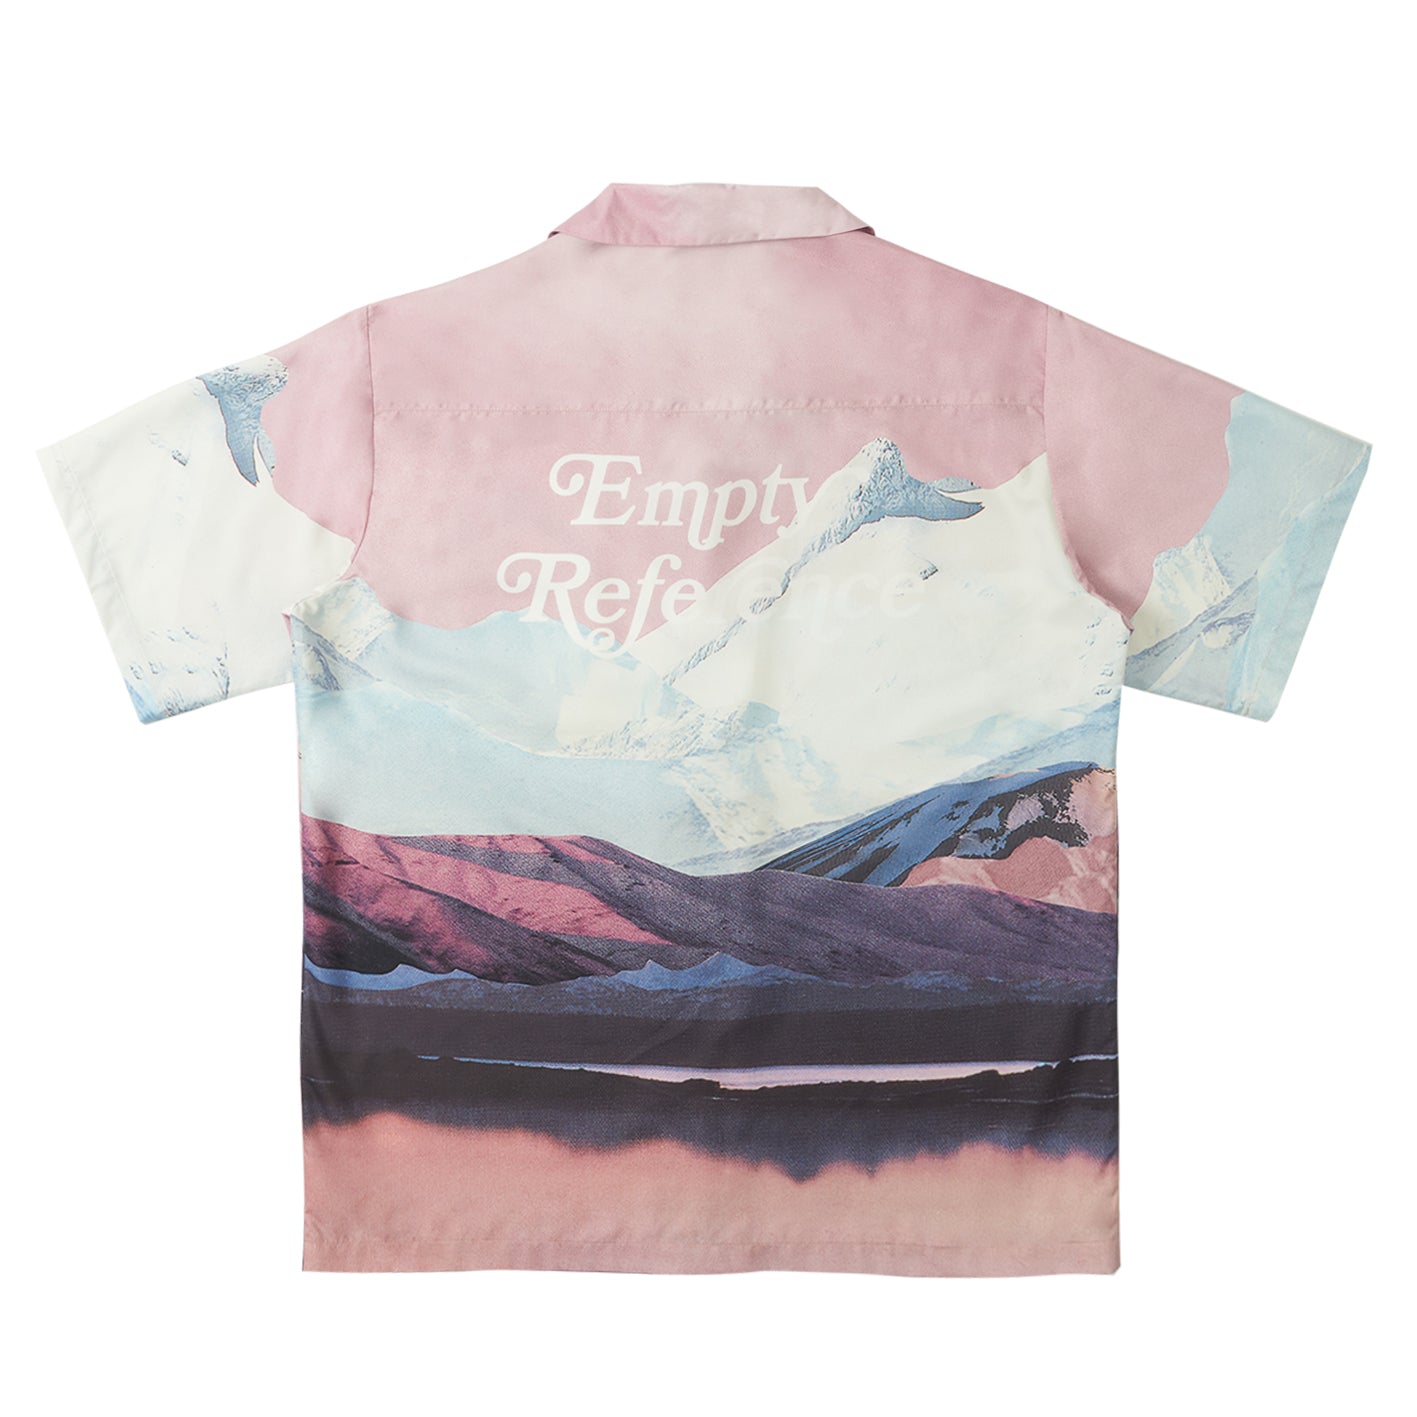 Pink Snow Mountain Print Short-sleeved Shirt Men's Trend Summer Loose Casual Shirt - Whispering Winds